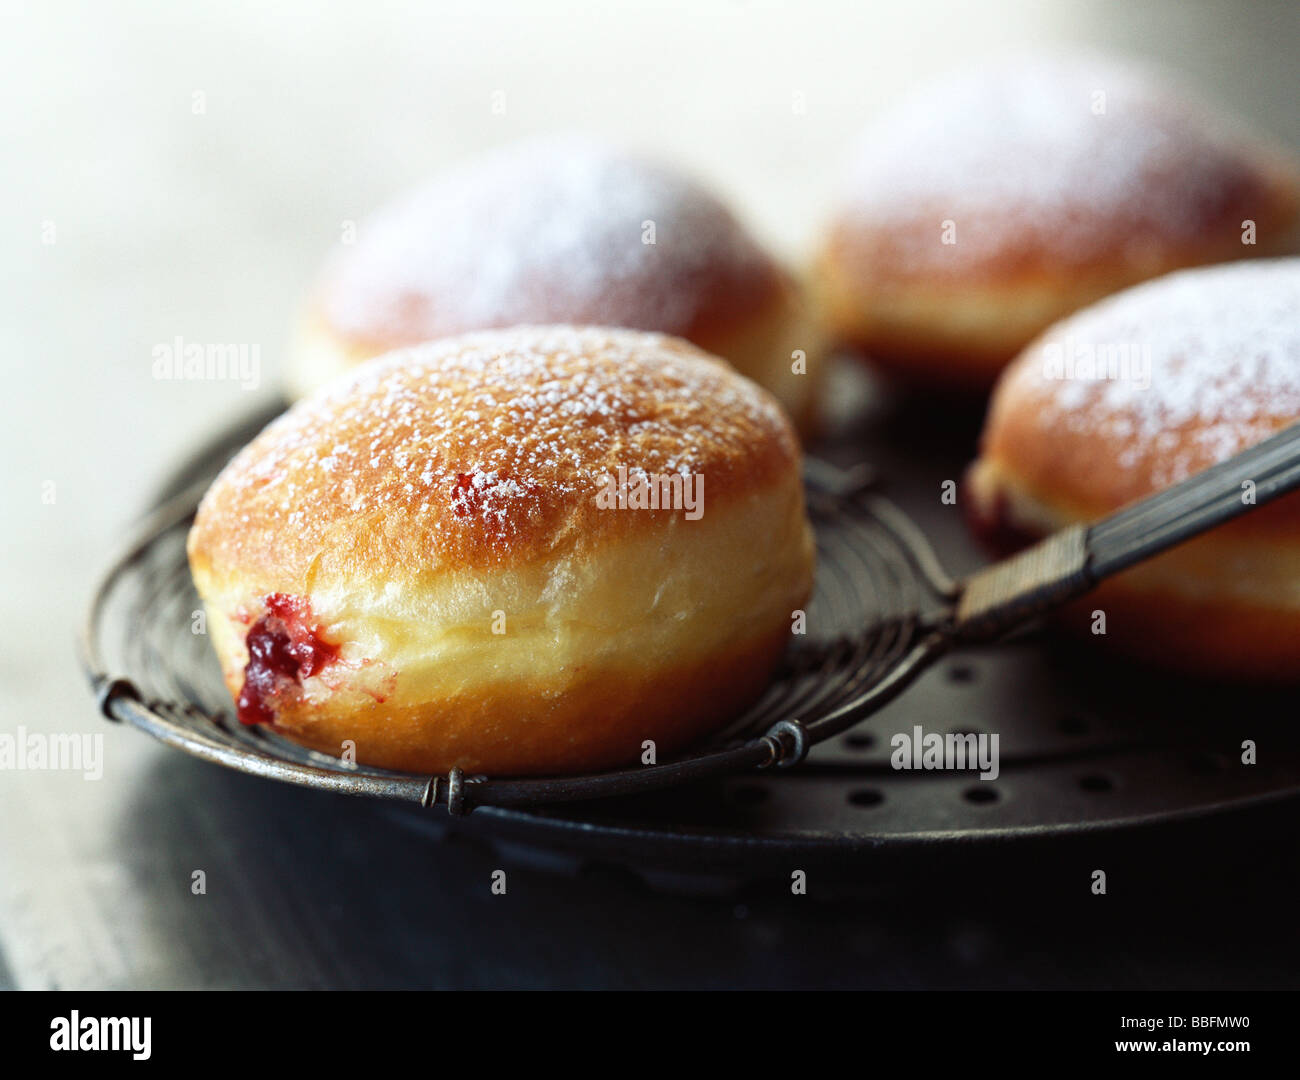 Jam filled donut dusted with powdered sugar Stock Photo